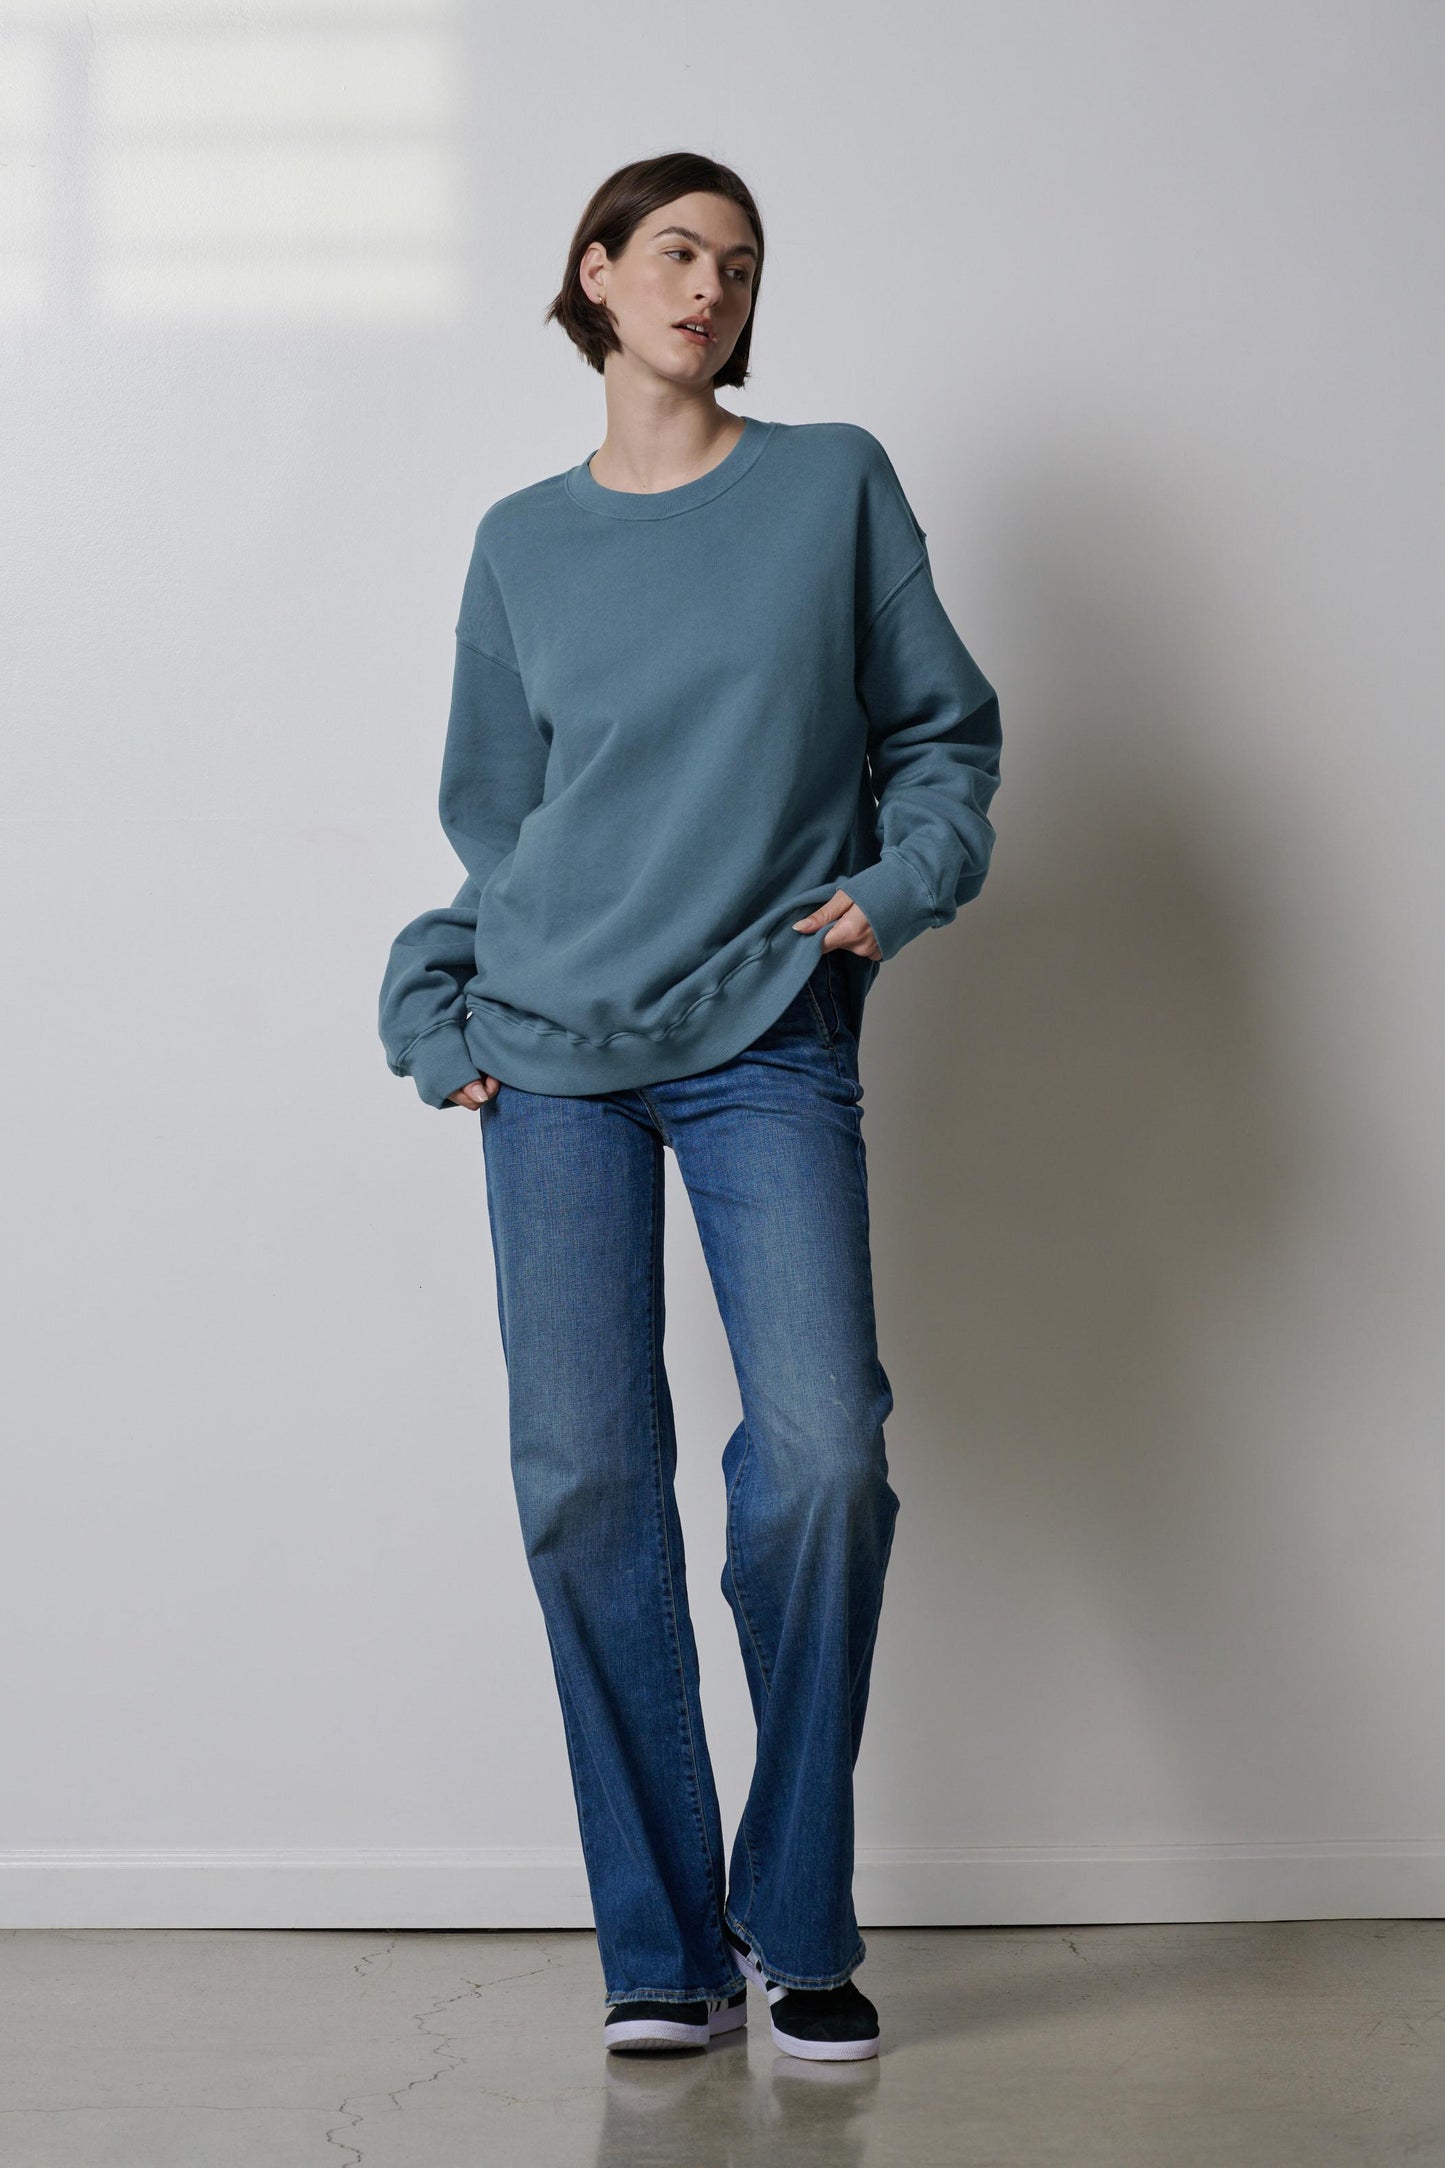 A woman wearing organic cotton blue jeans and a Velvet by Jenny Graham Abbot sweatshirt.-35190150136001